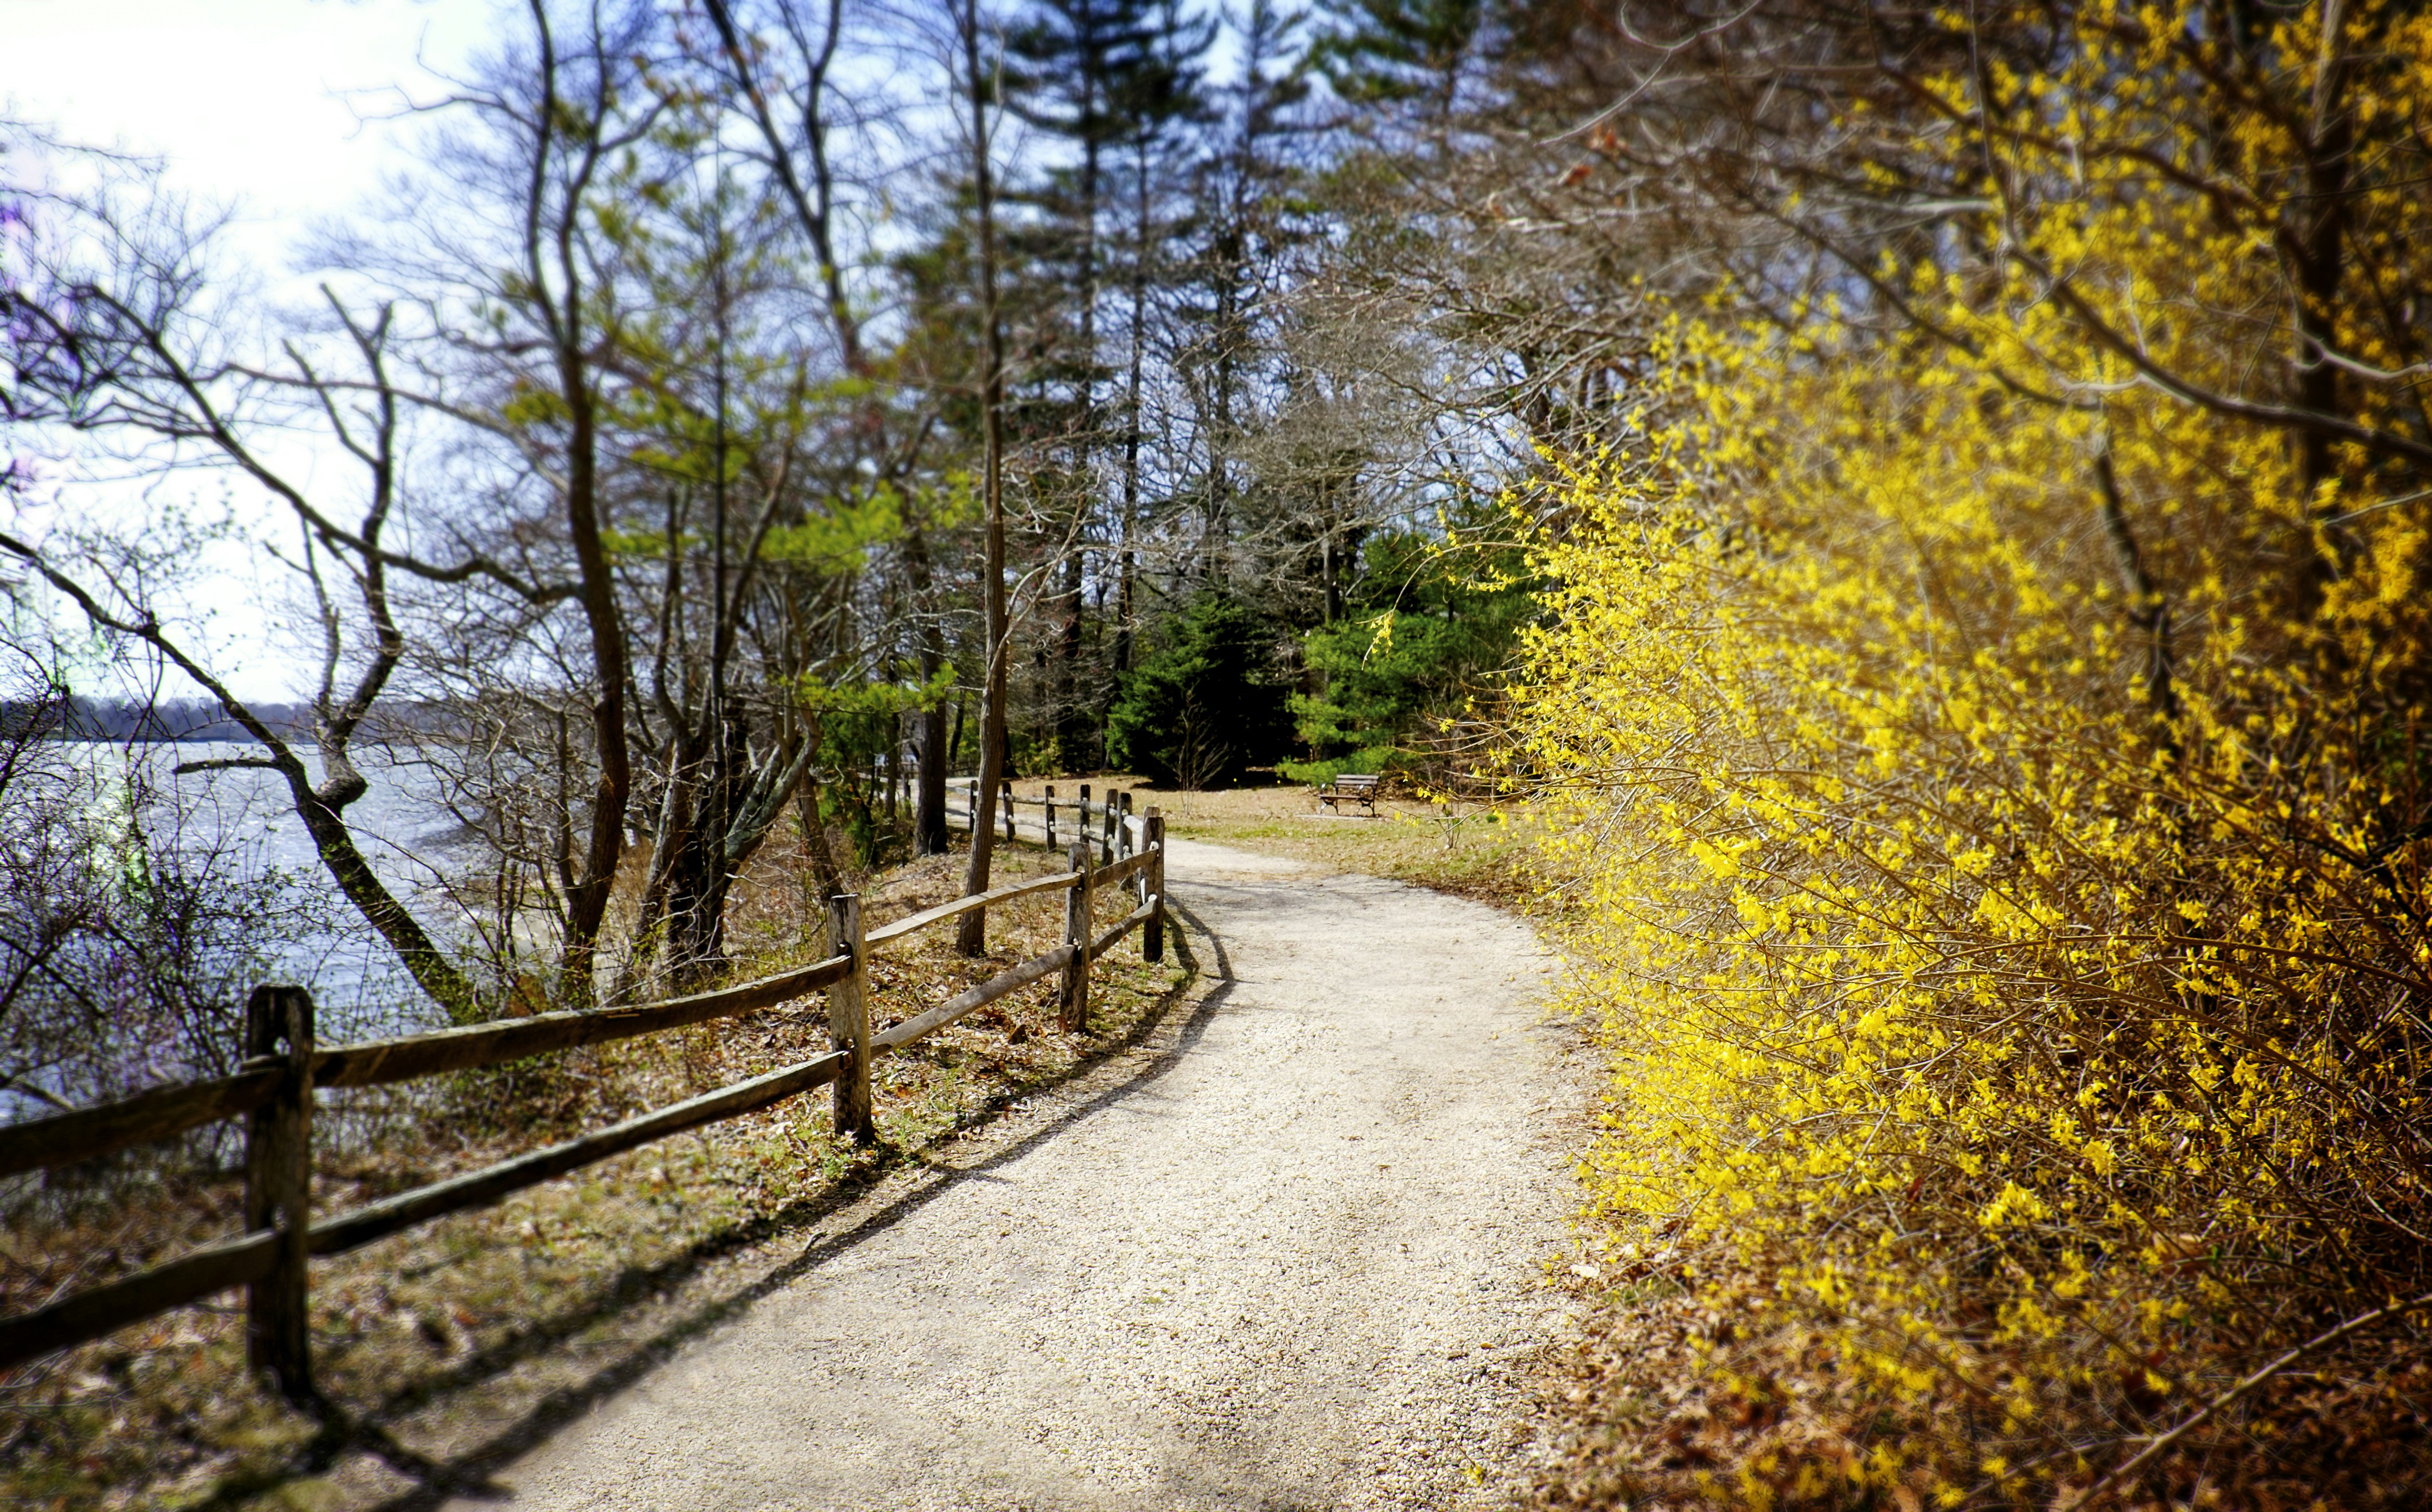 A landscape view of part of the Empire State Trail in Long Island, NY